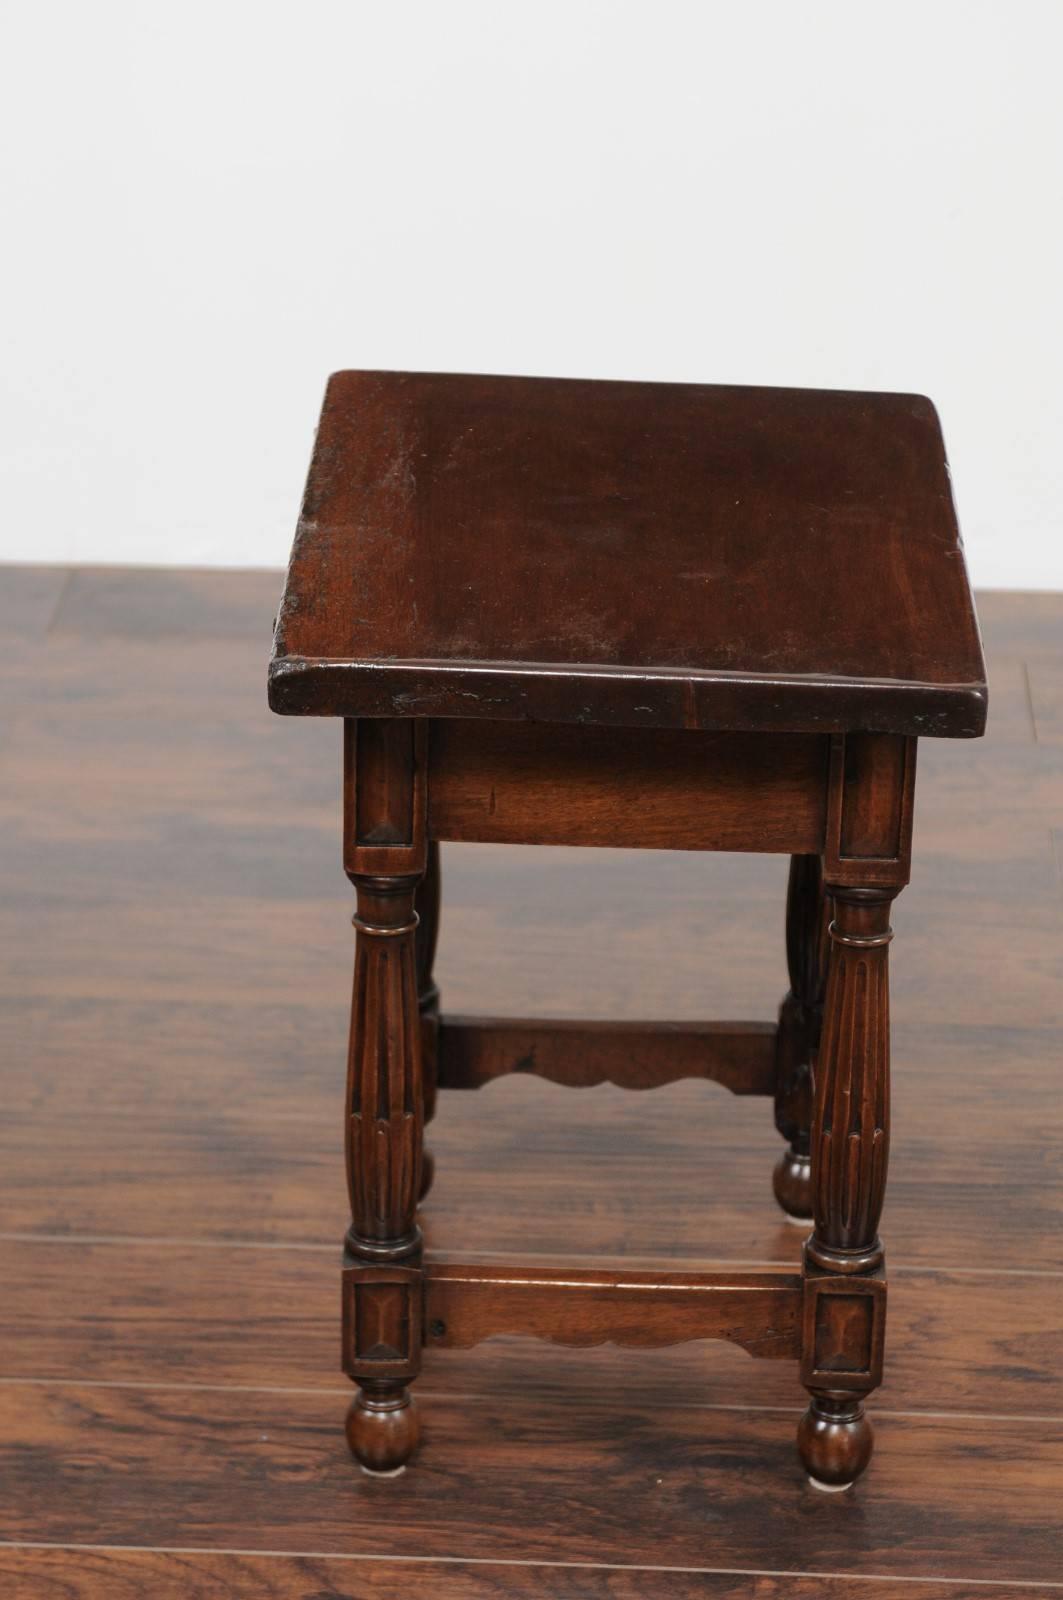 Petite Italian Walnut Side Table with Single Drawer and Fluted Legs, circa 1870 For Sale 2